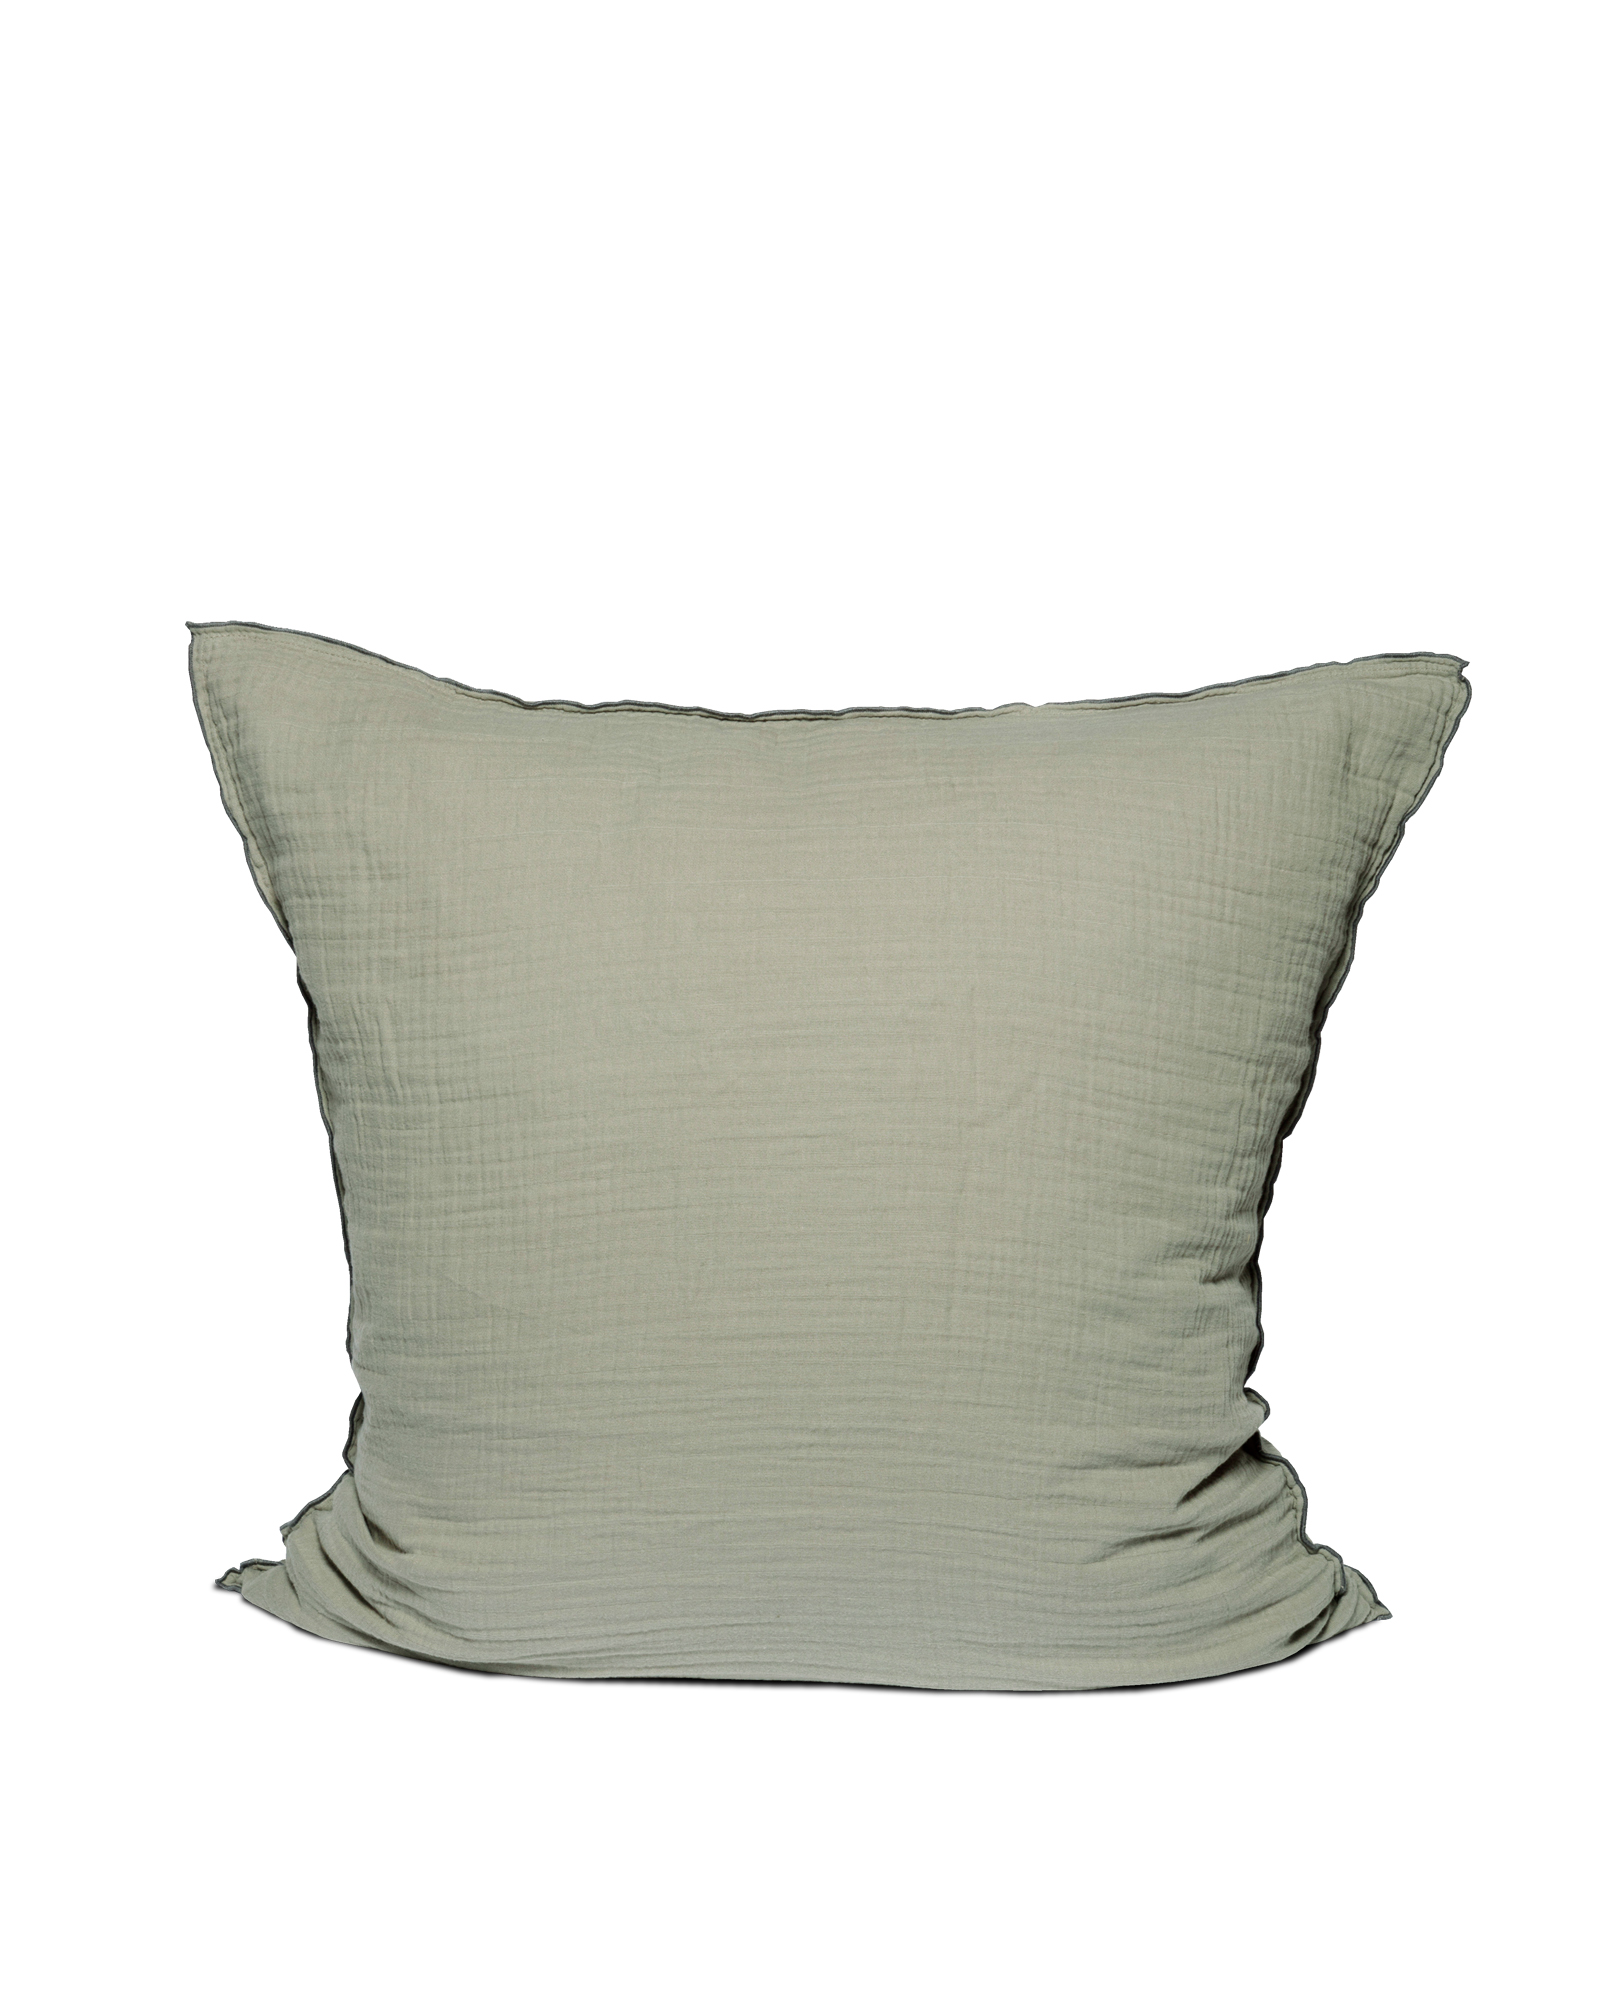 MARIE-MARIE - Pillowcase COCOON Olive - 65x65 cm - Olive